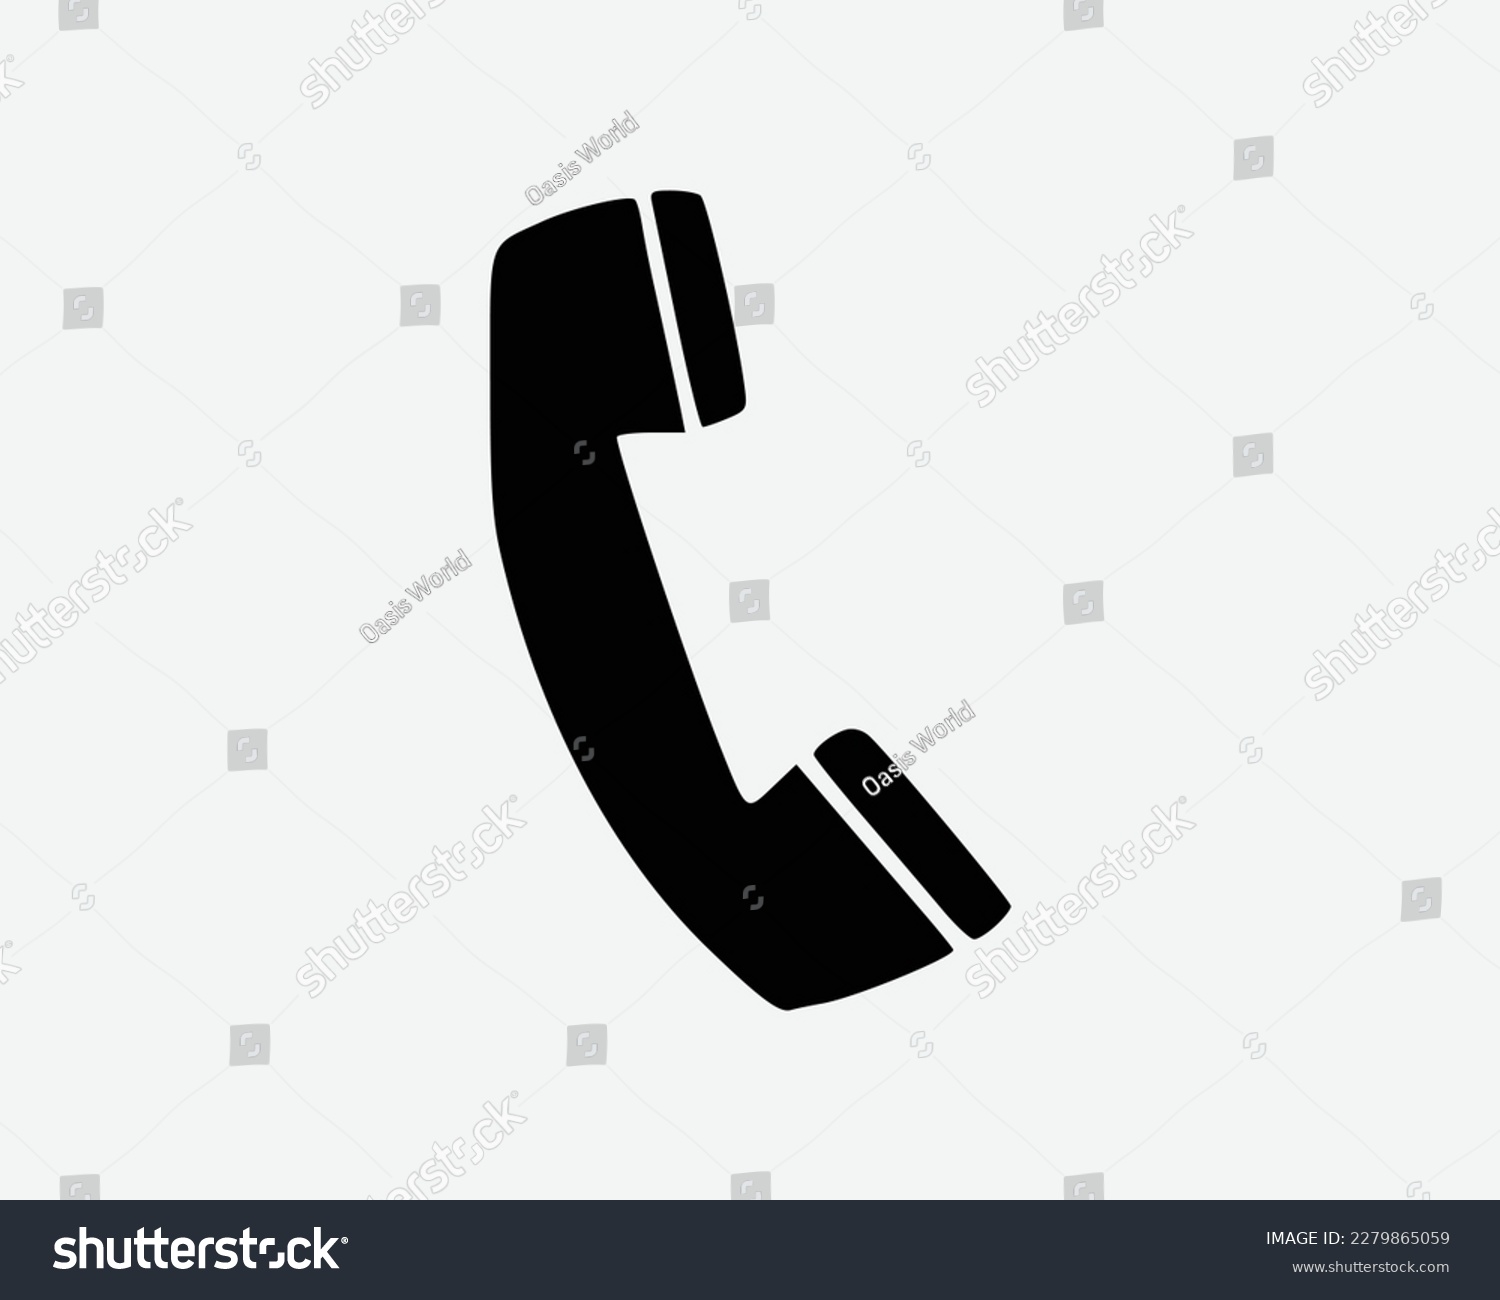 SVG of Telephone Phone Receiver Call Hotline Cell Contact Icon Black White Silhouette Sign Symbol Vector Graphic Clipart Illustration Artwork Pictogram svg